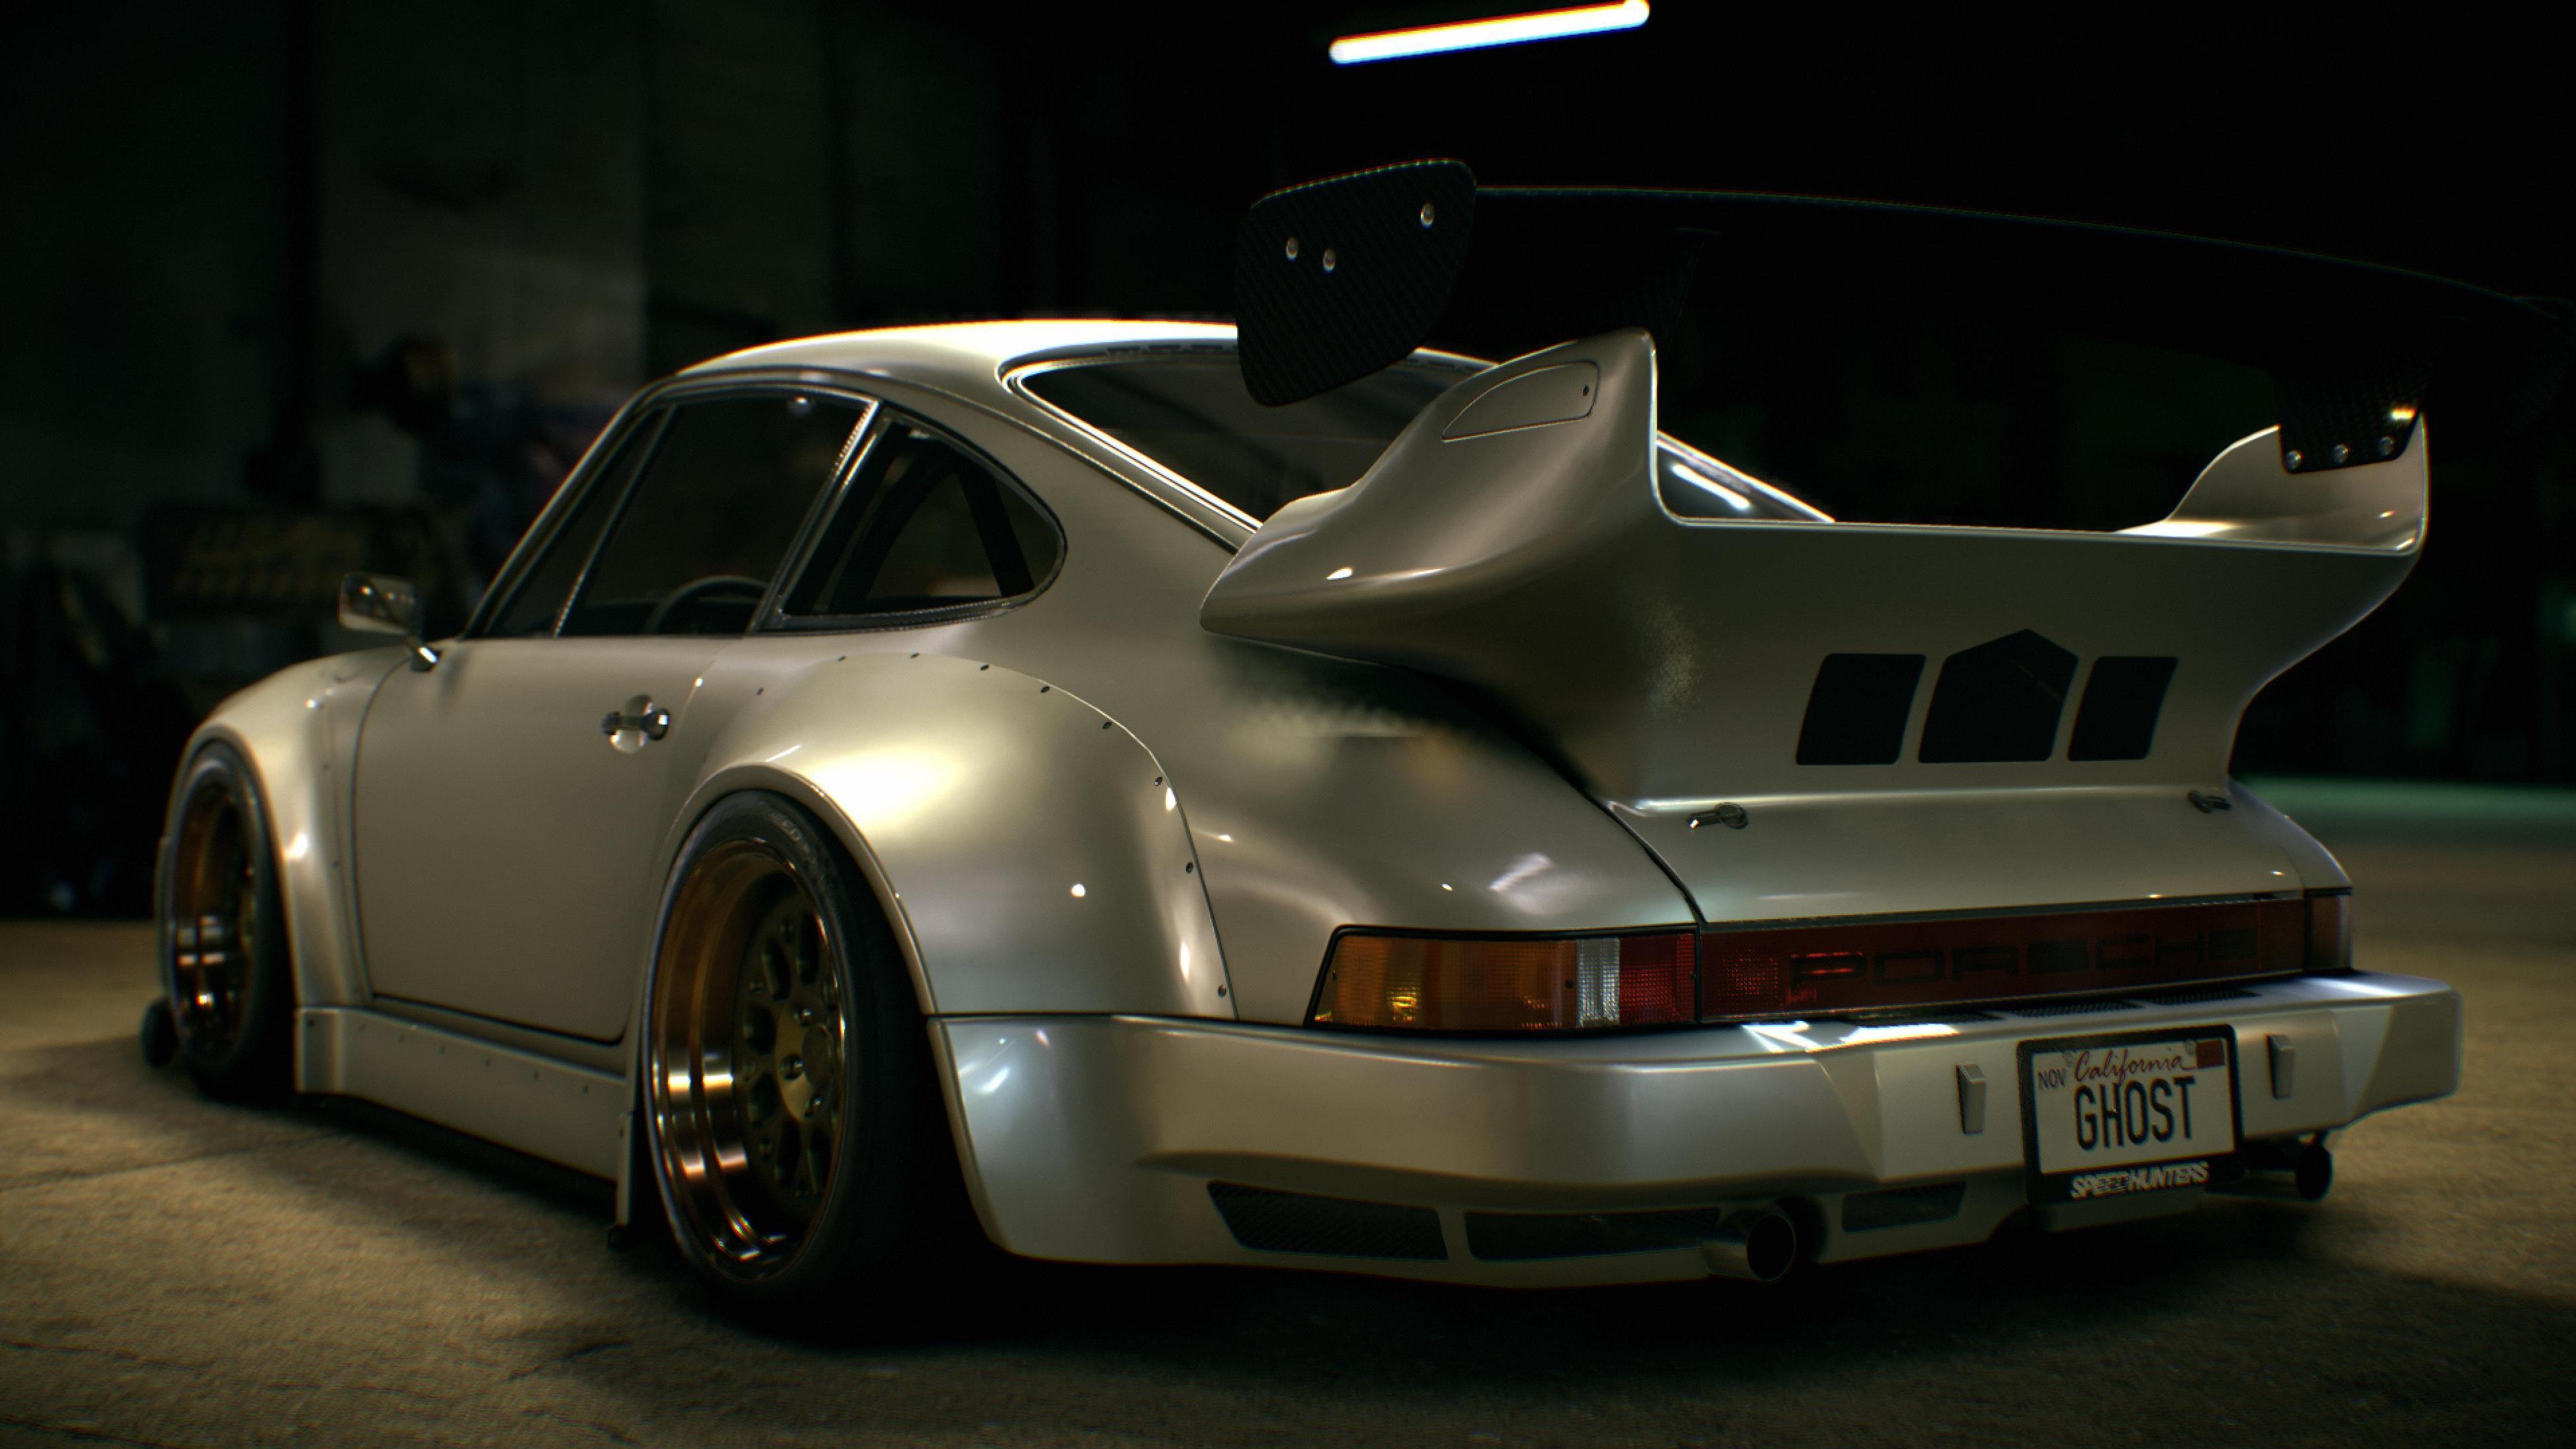 Need For Speed Hunters for 3840 x 2160 Ultra HD resolution